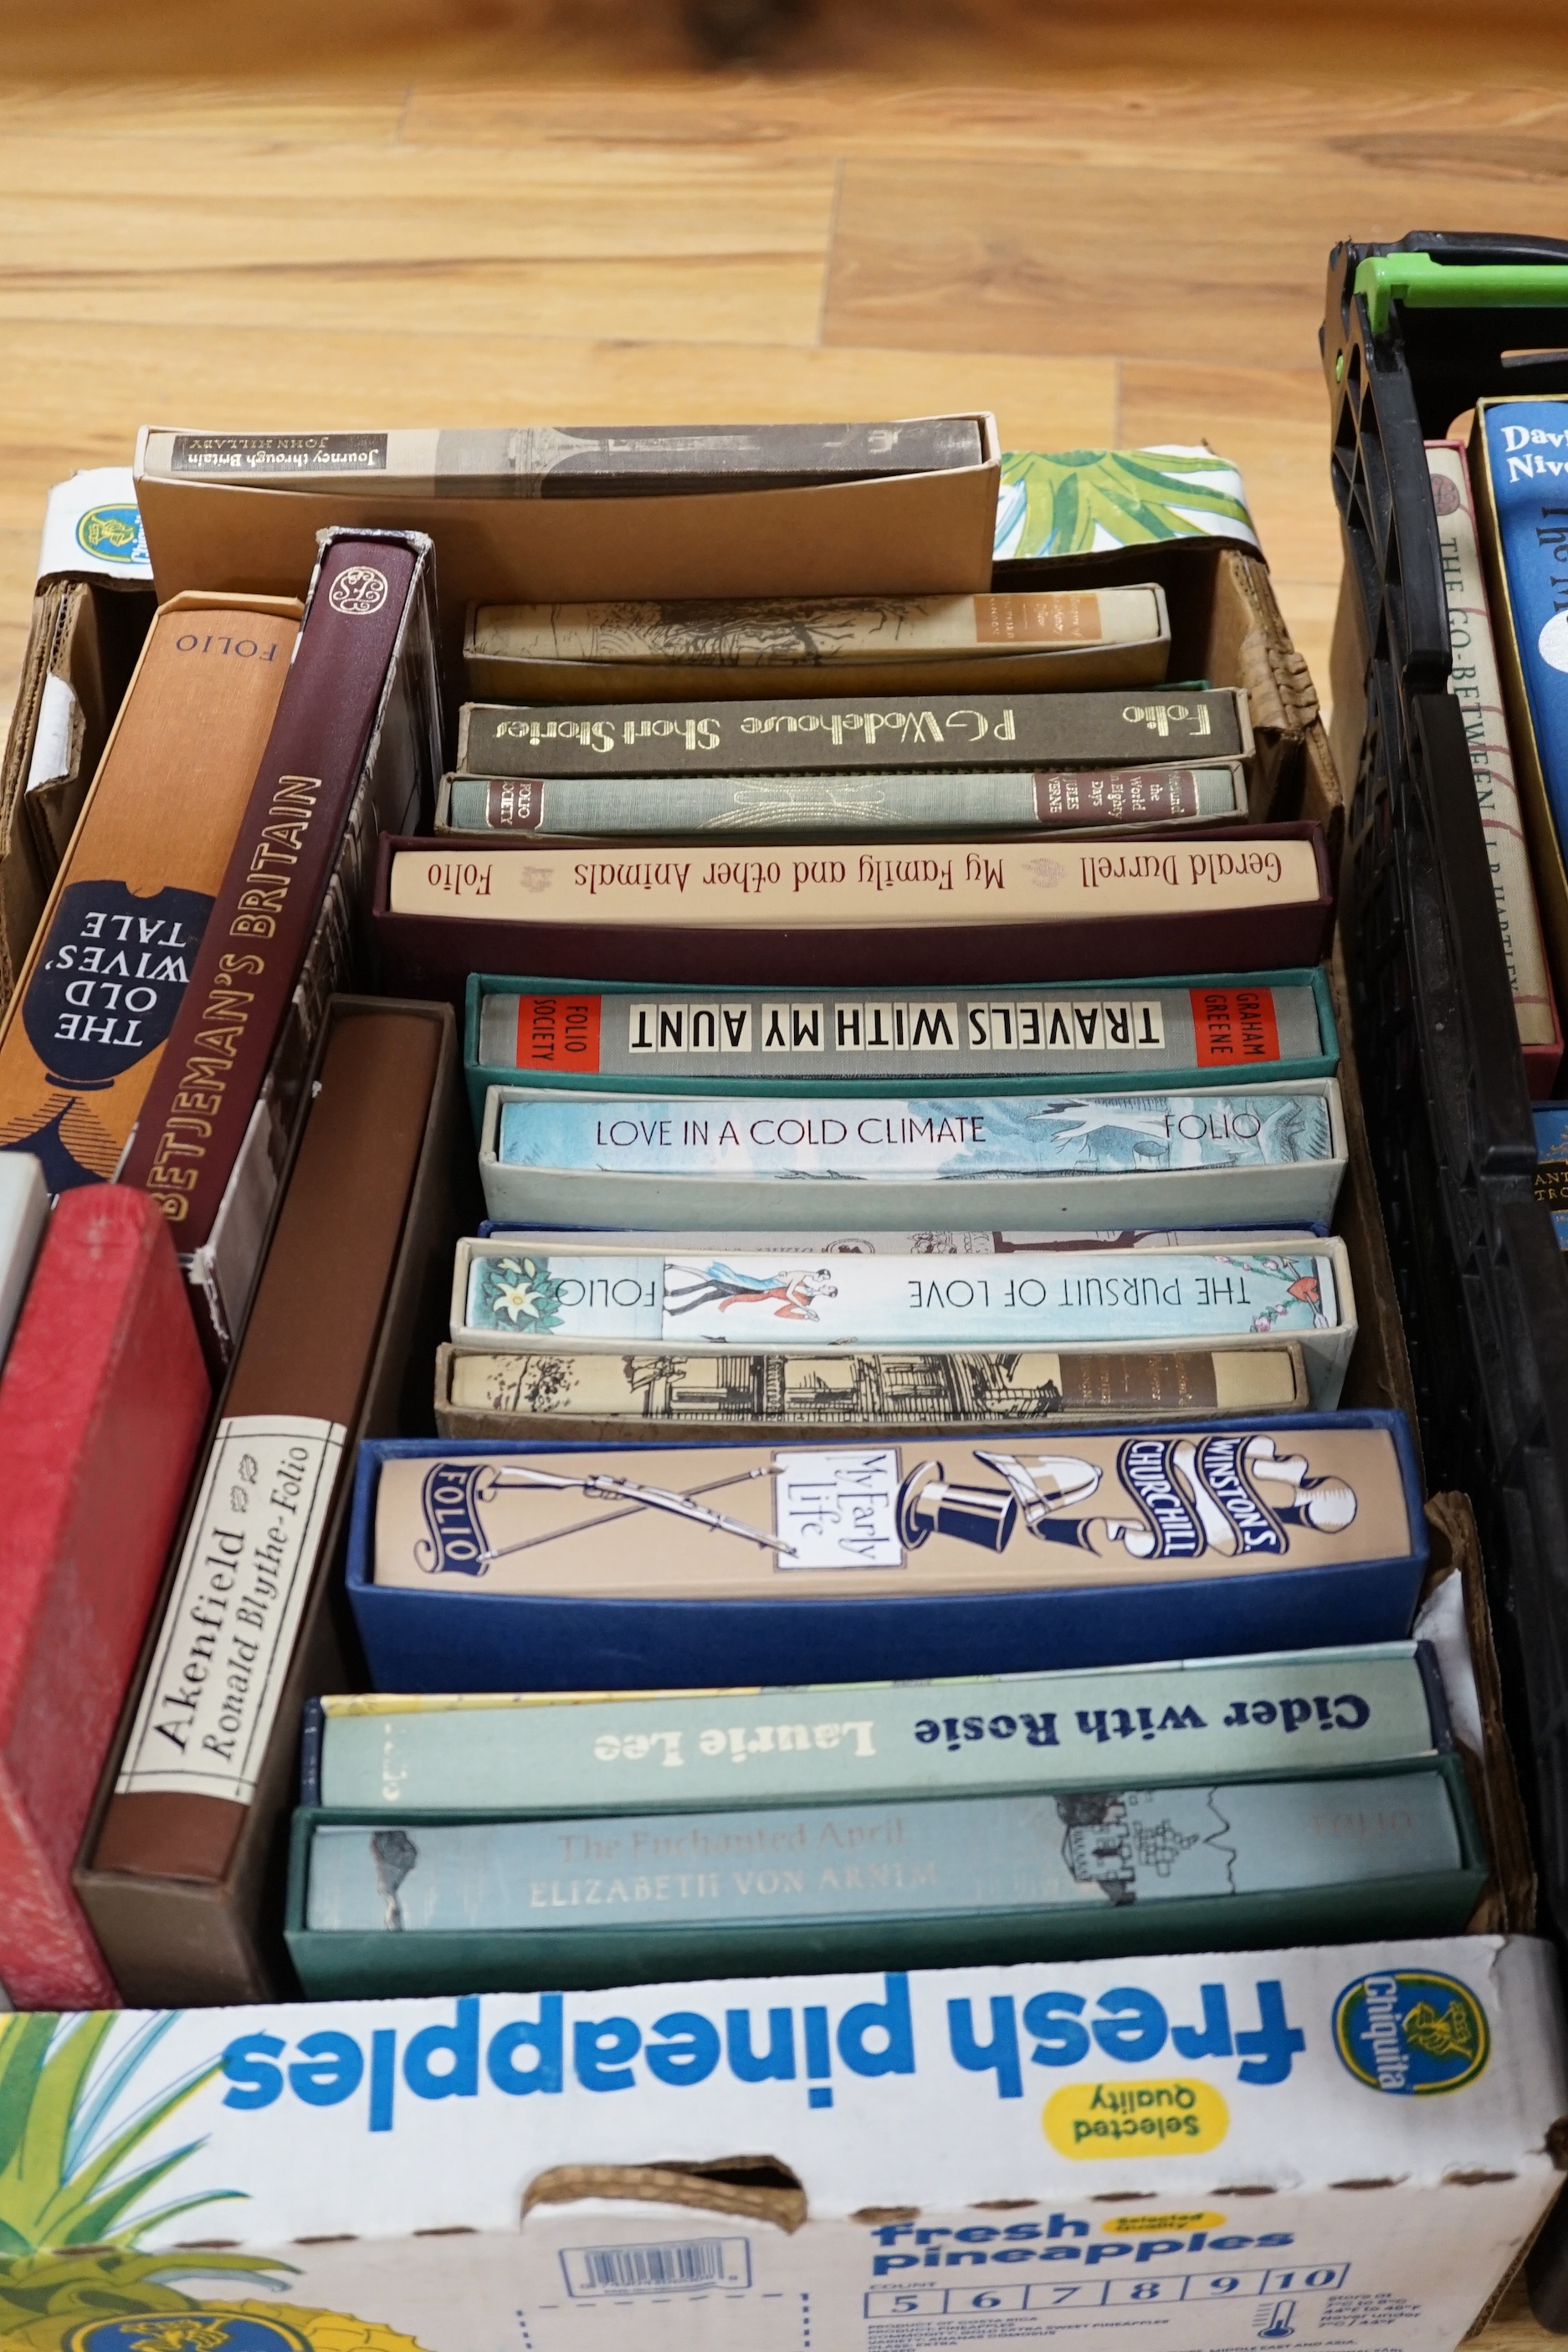 Approx. 45 Folio Society editions, mainly novels